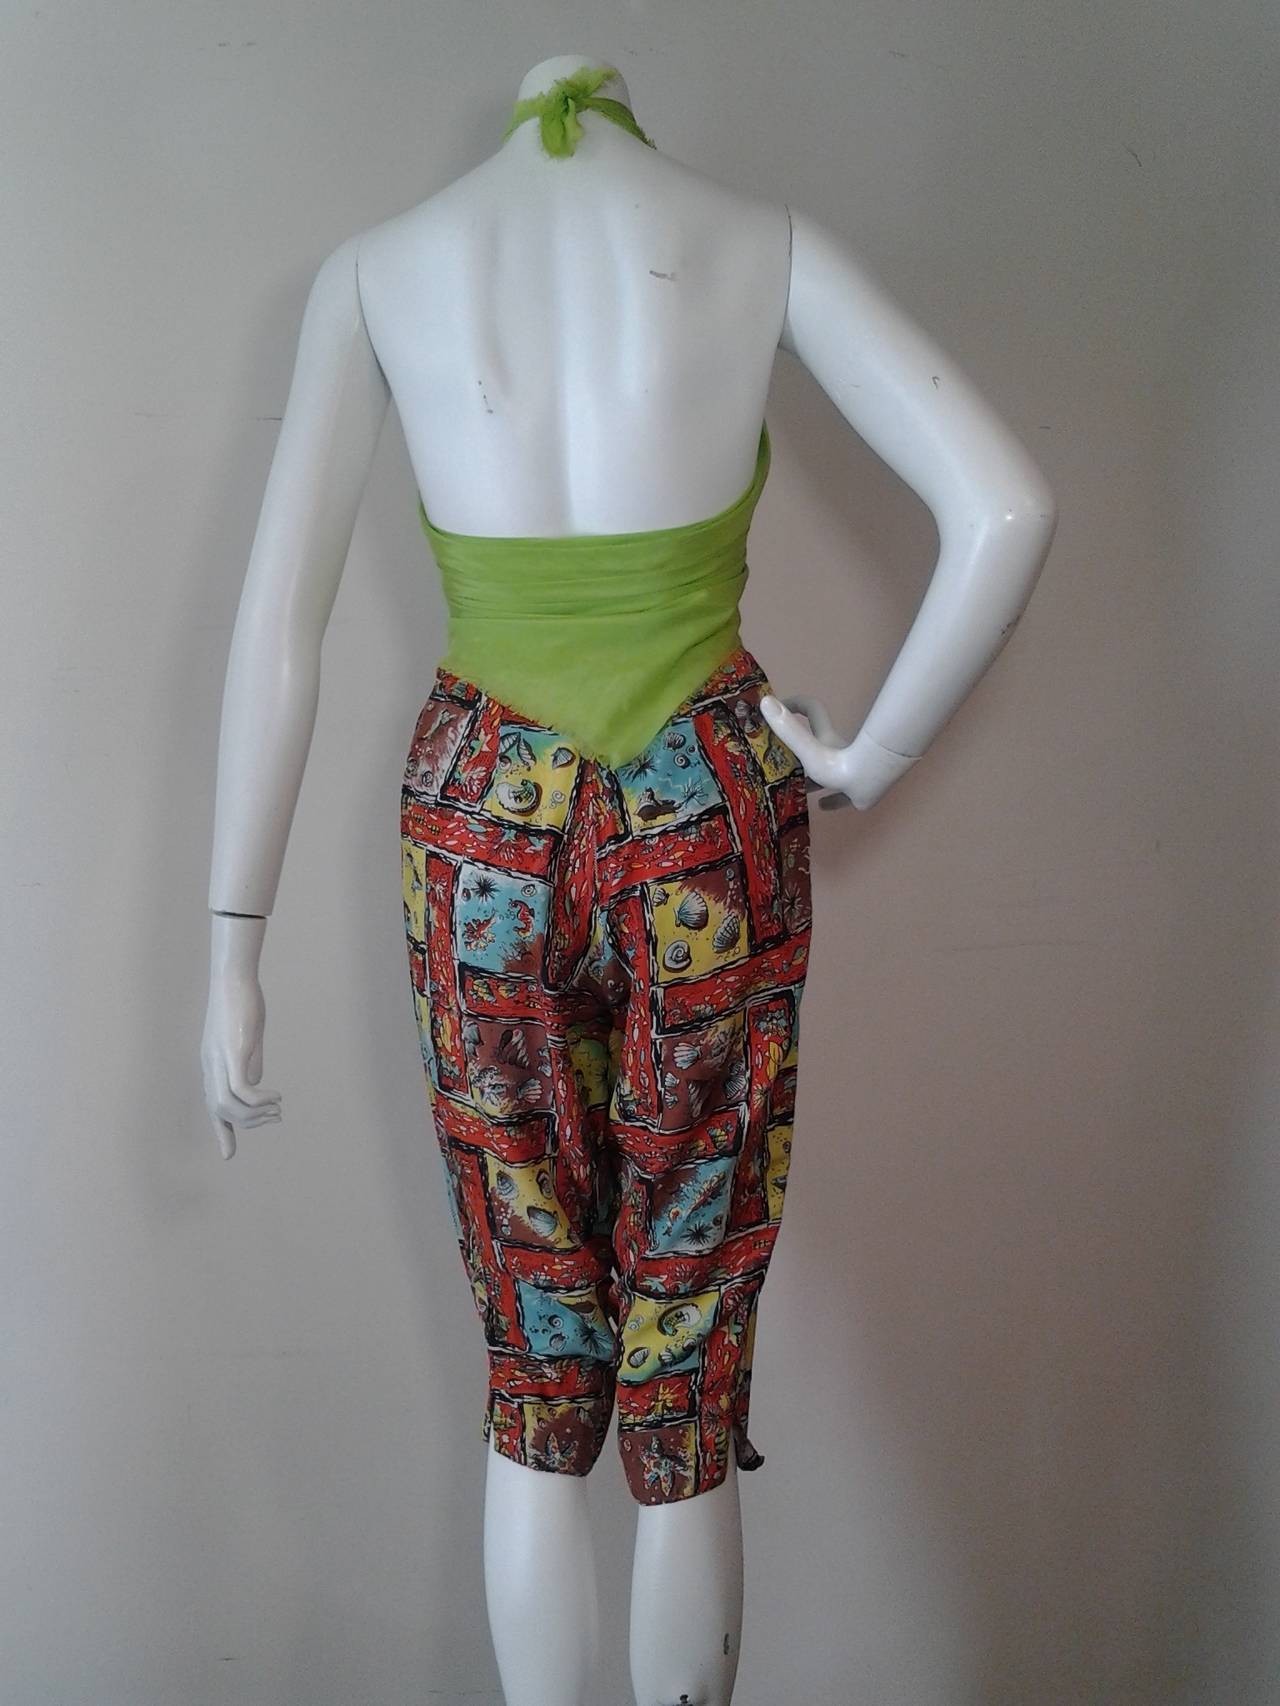 Adorable 1950s washed silk capri pants w/ sea shell motif print.  High waist with coconut button, back center zip, and side vents at cuffs. 

Pictured with silk scarf as top, included in purchase price.